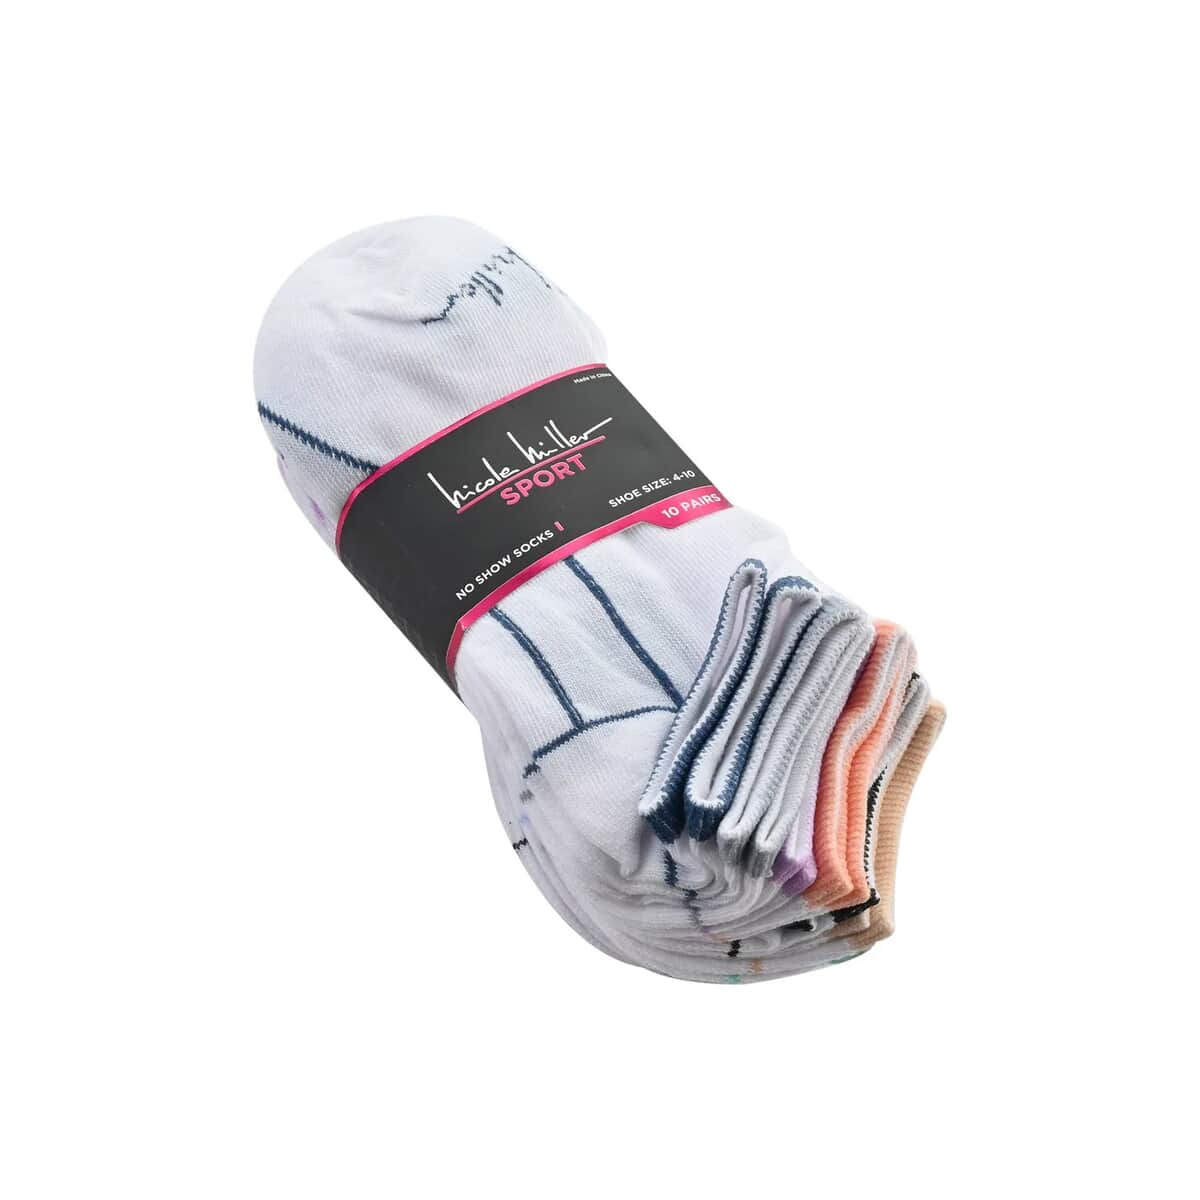 TLV Nicole Miller 10 Pairs No Show Socks (Sizes 4-10) - White/Multi (Ships in 8-10 business days) image number 6